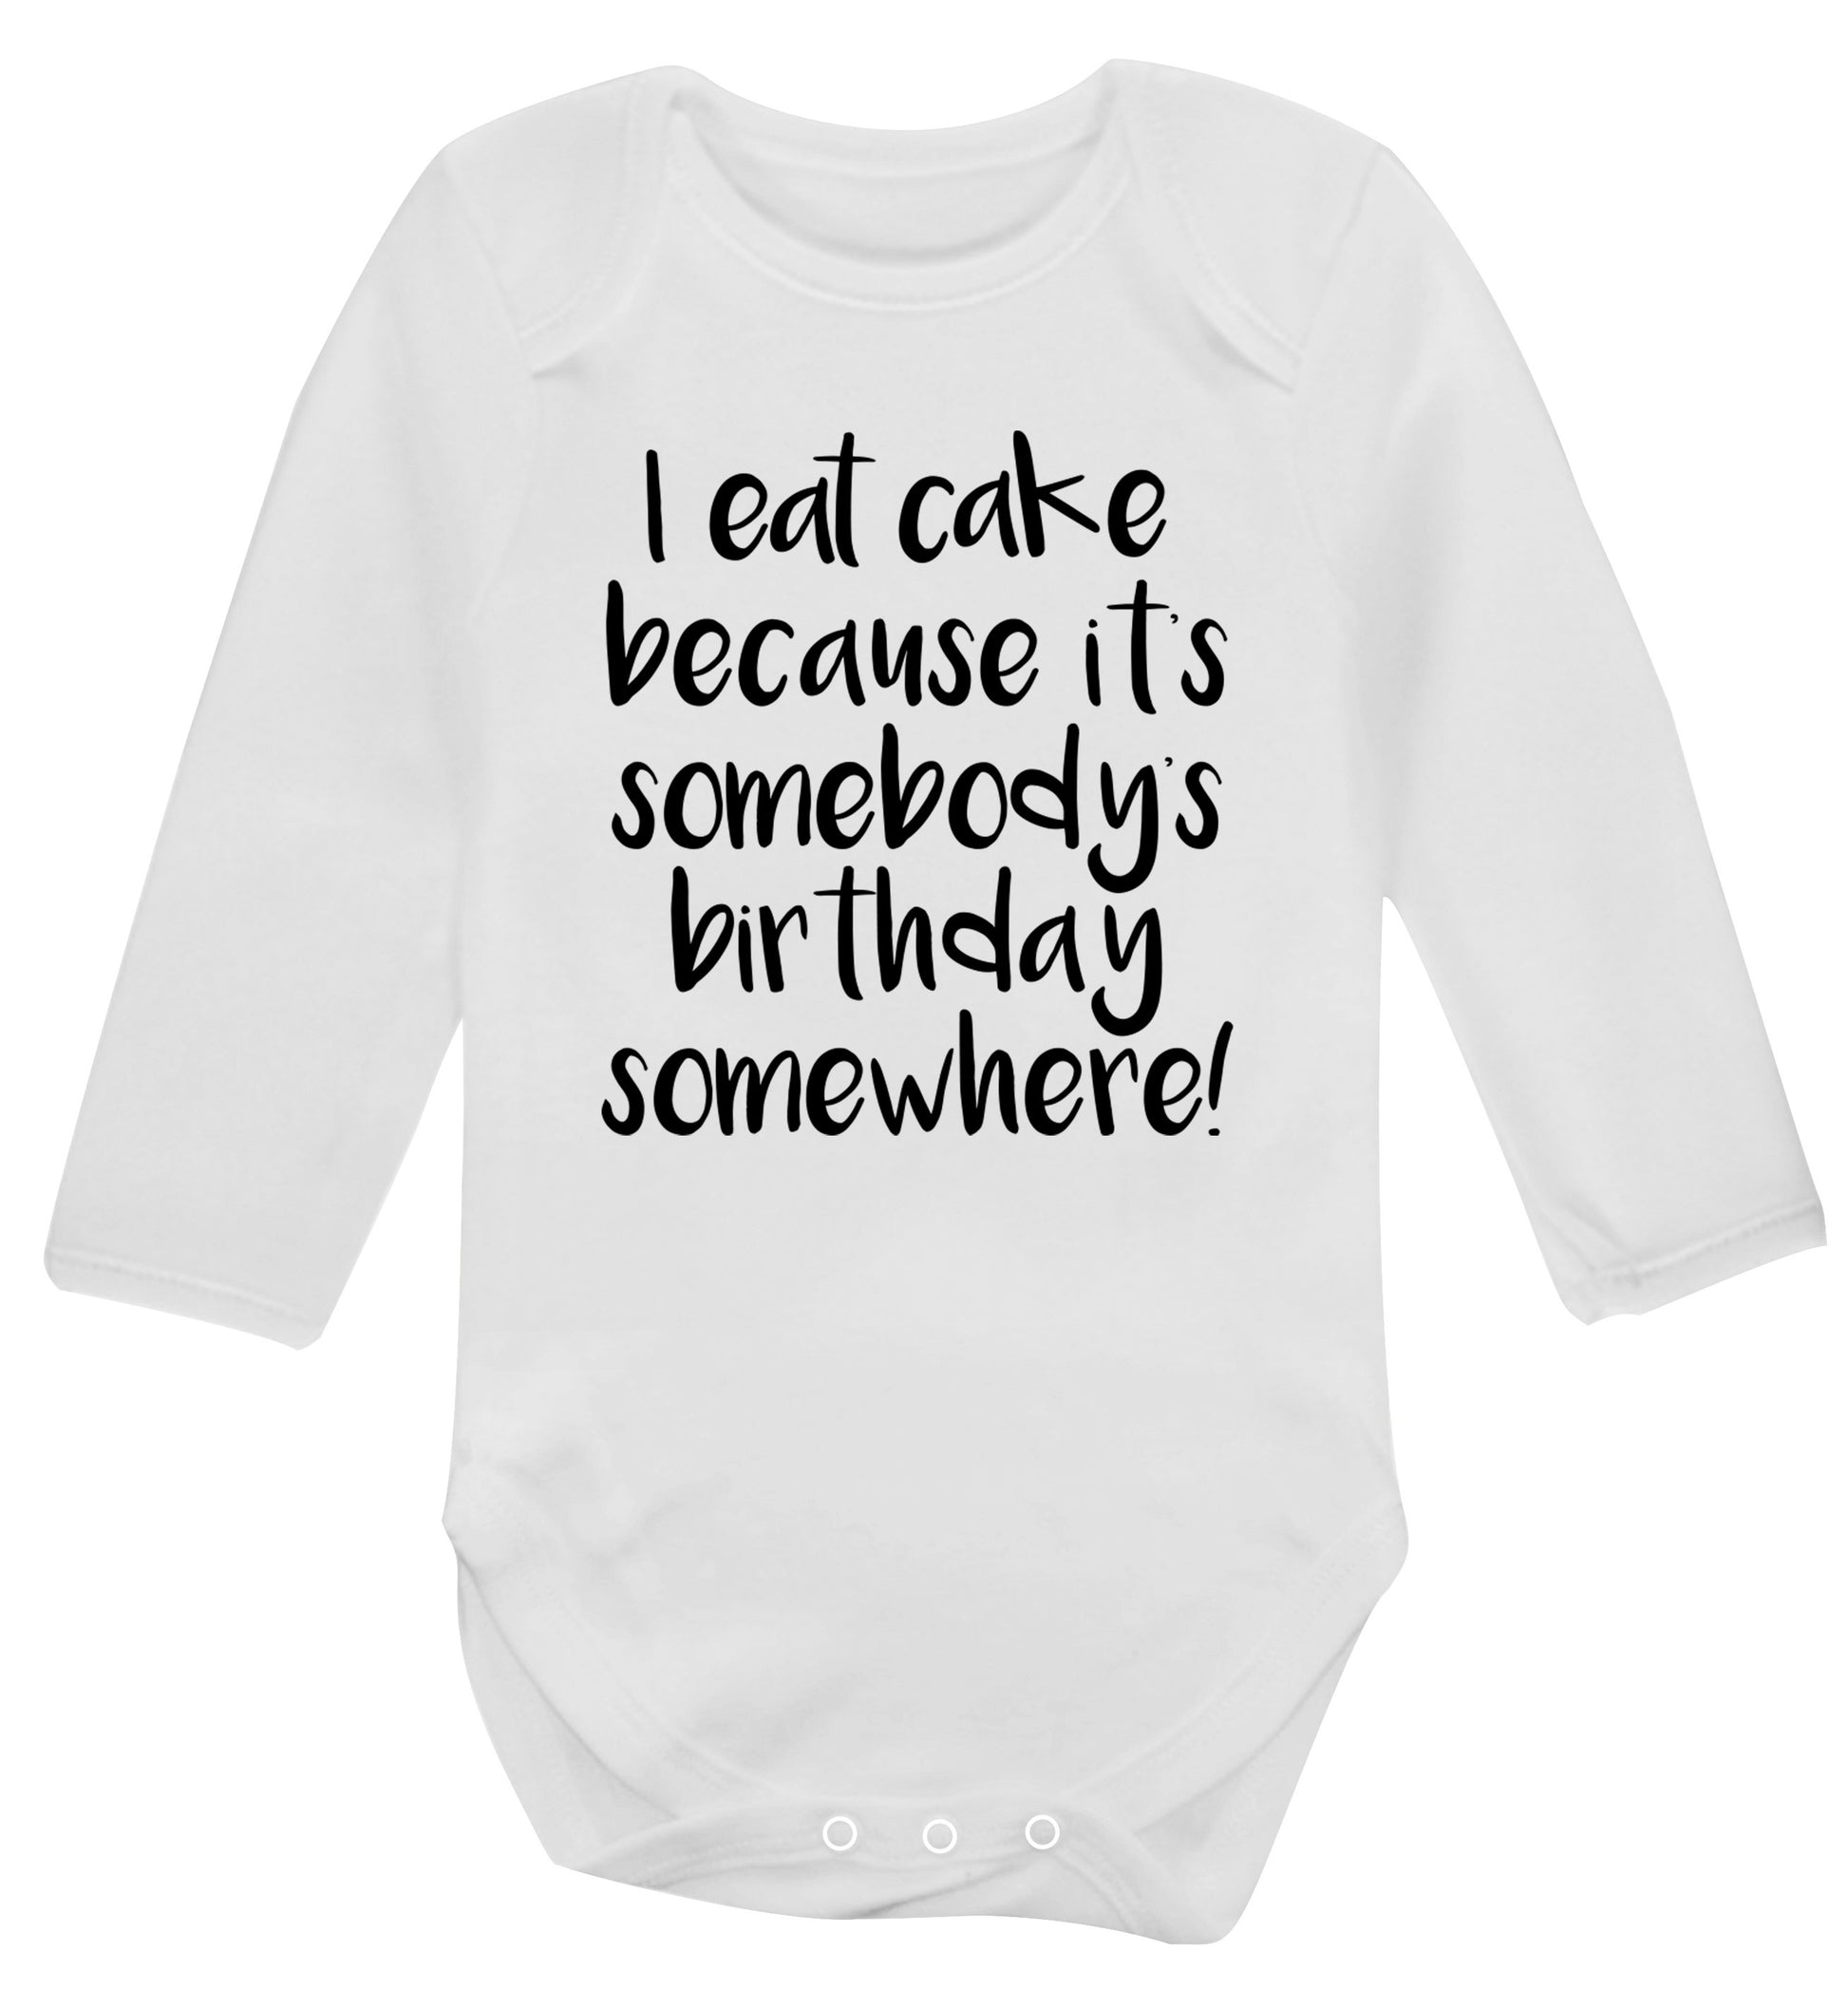 I eat cake because it's somebody's birthday somewhere! Baby Vest long sleeved white 6-12 months